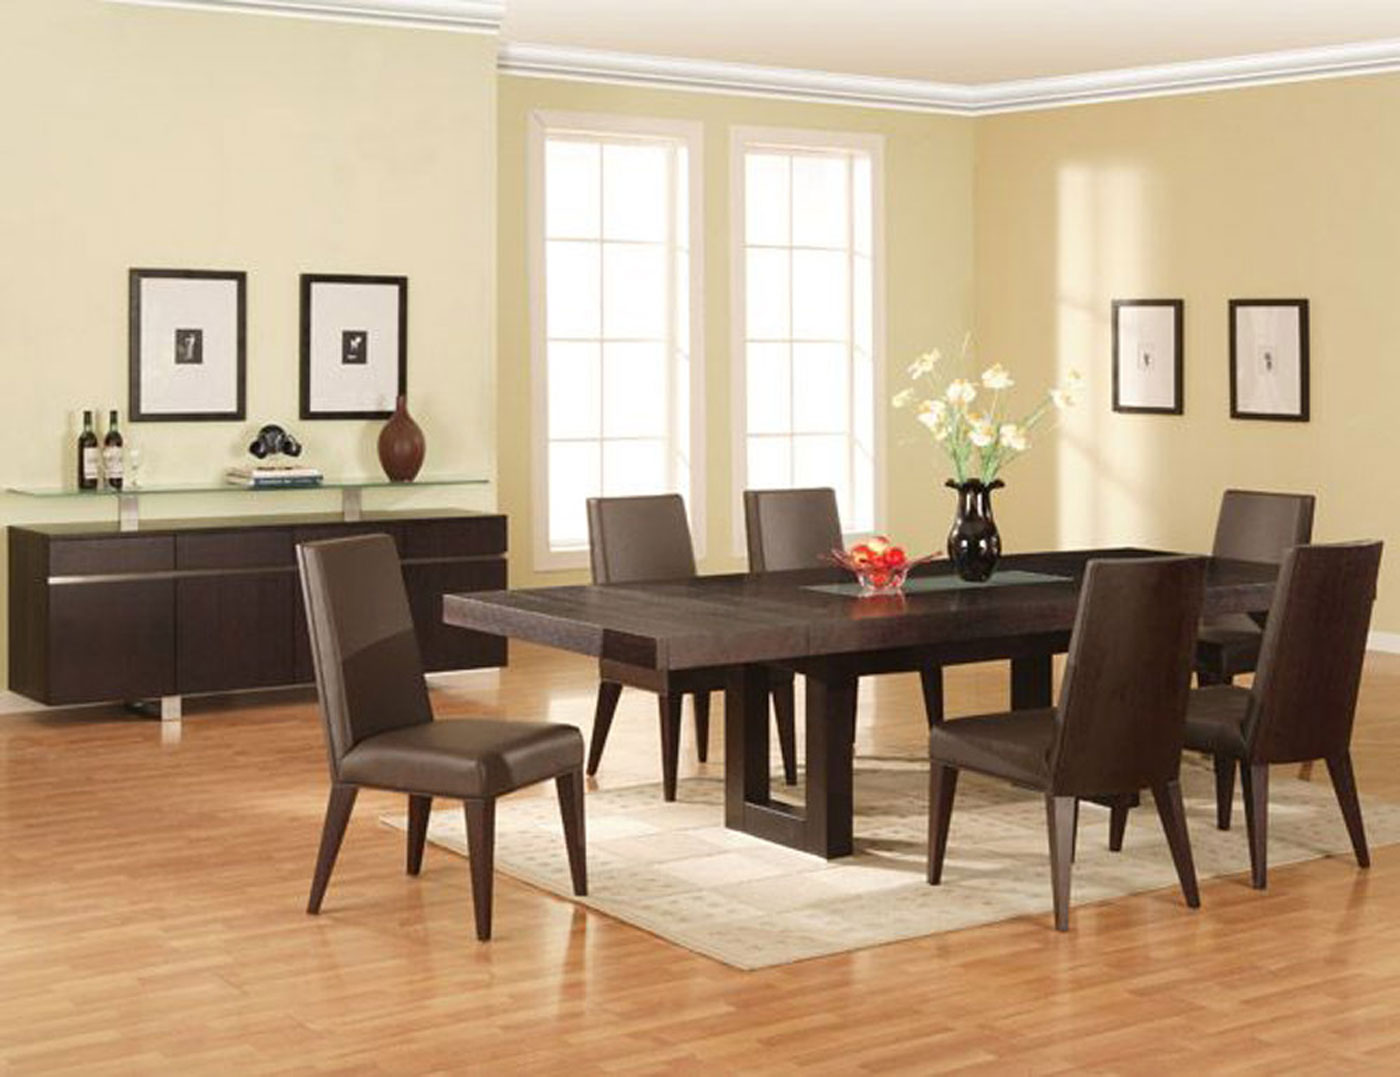 Asian Dining Table Modern Asian Dining Room Furniture Table 6 Person Design Ideas With Minimalist Leather Furniture Designs Also Modern Cabinet Glass Top Ideas Plus Inspiring Striped Wood Flooring With Thick Carpet Dining Room Modern Dining Room Furniture Design